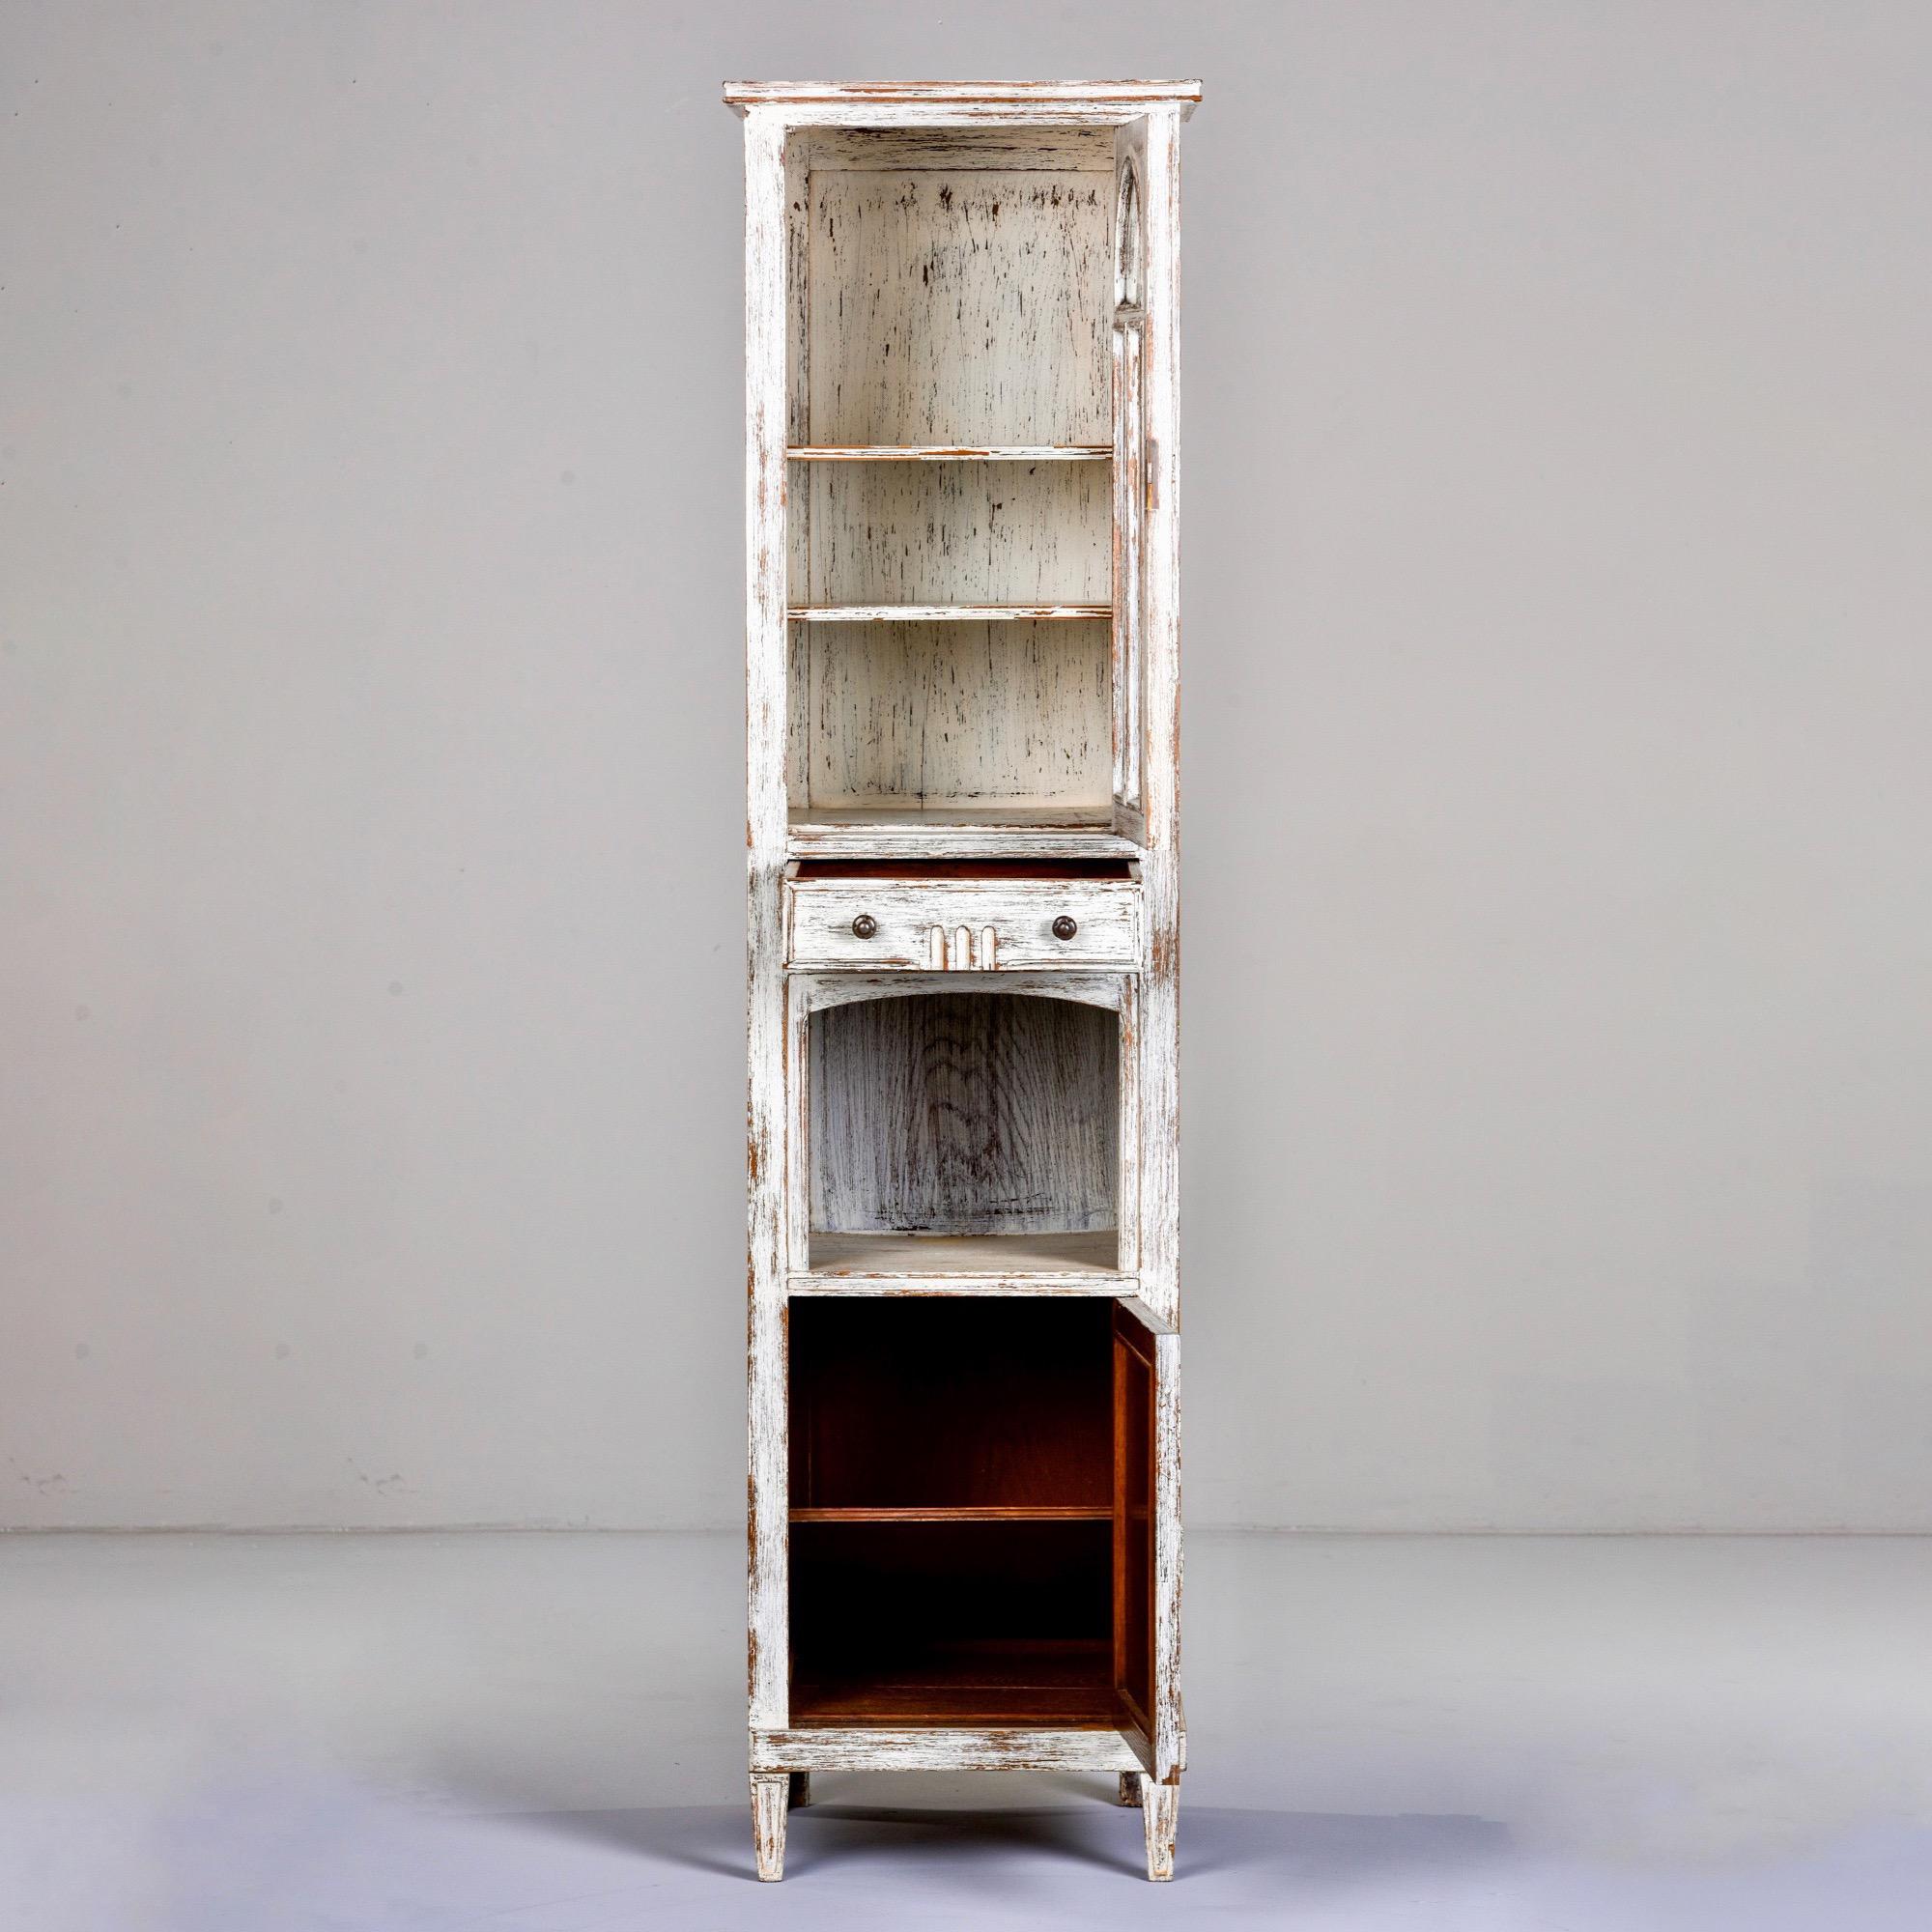 Painted Early 20th Century Tall Narrow French Oak Cabinet with White Paint